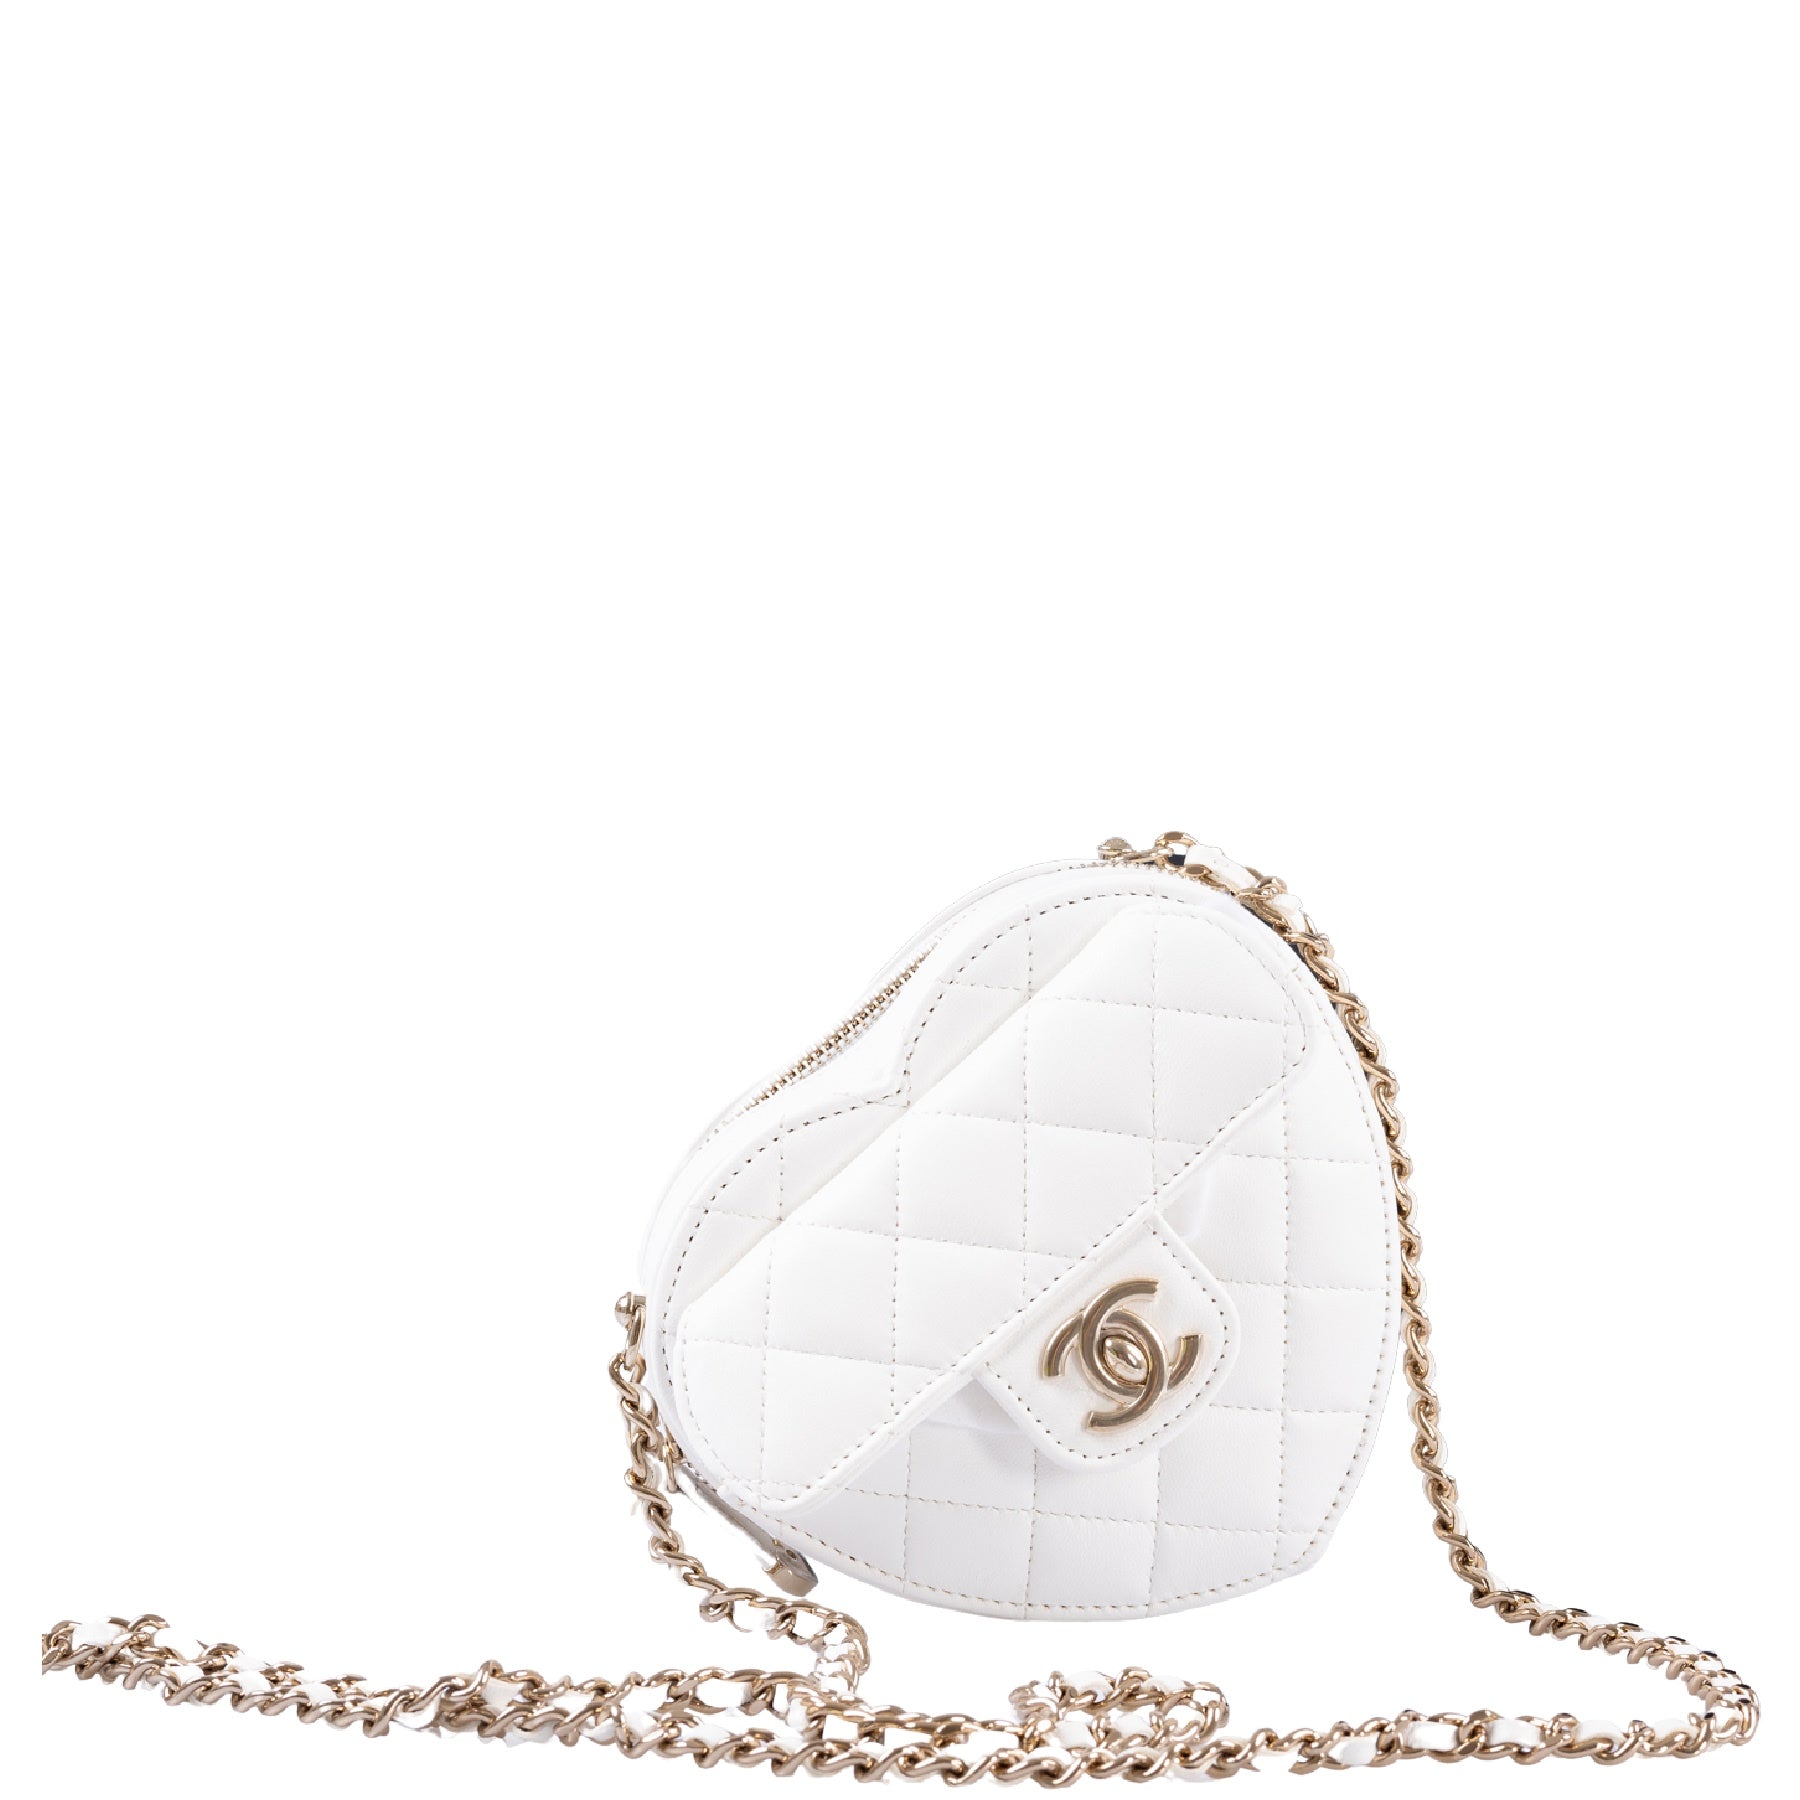 CHANEL Lambskin Quilted CC In Love Heart Bag Black 988495